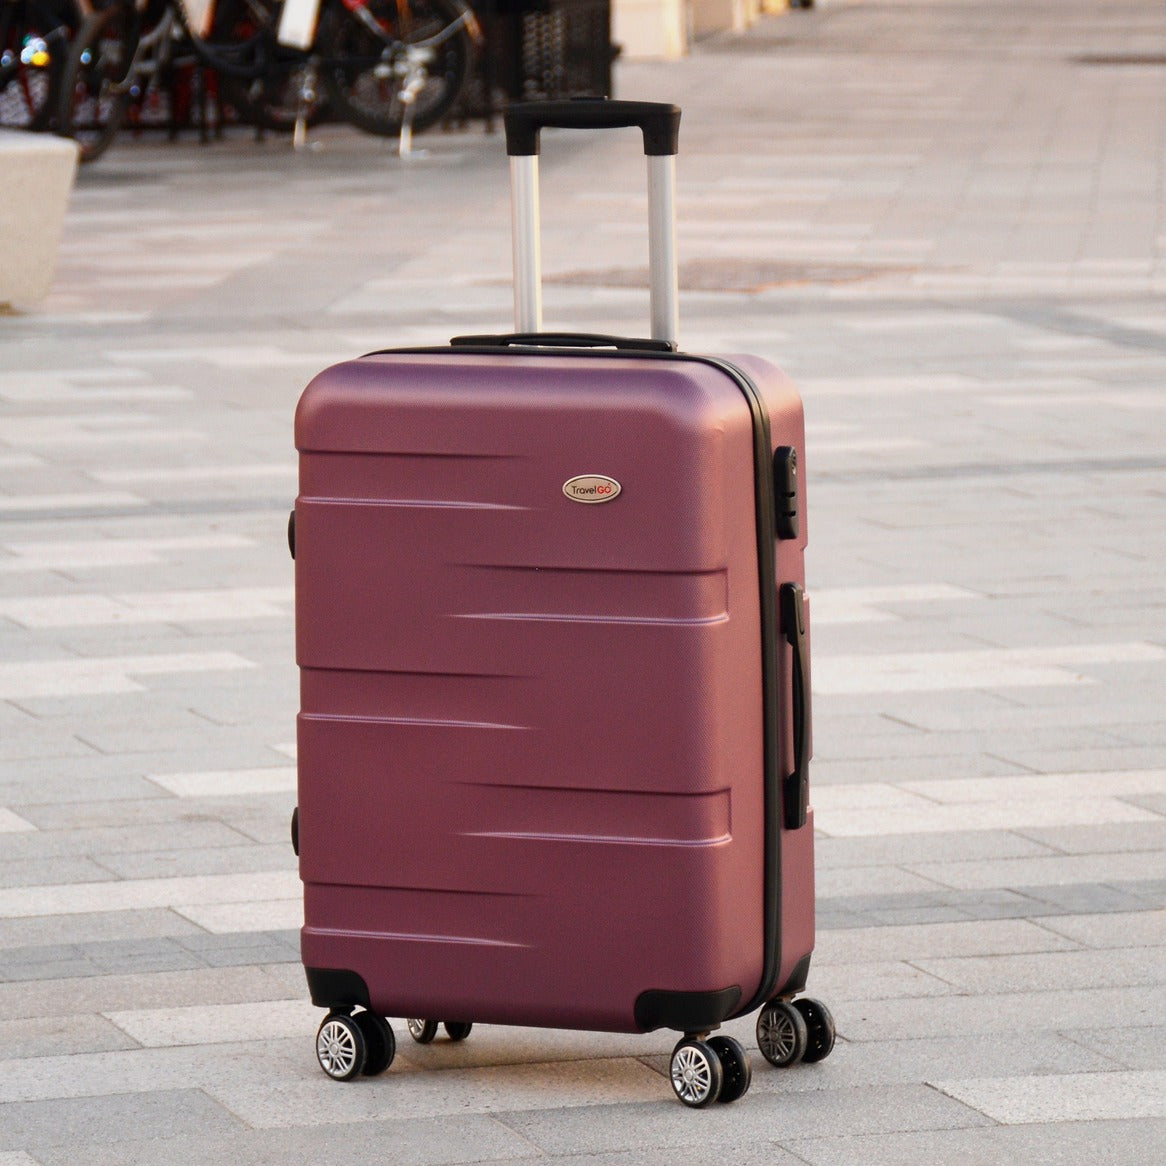 20" Purplish Red Colour JIAN ABS 559 Luggage Lightweight Hard Case Carry On Trolley Bag with Spinner Wheel